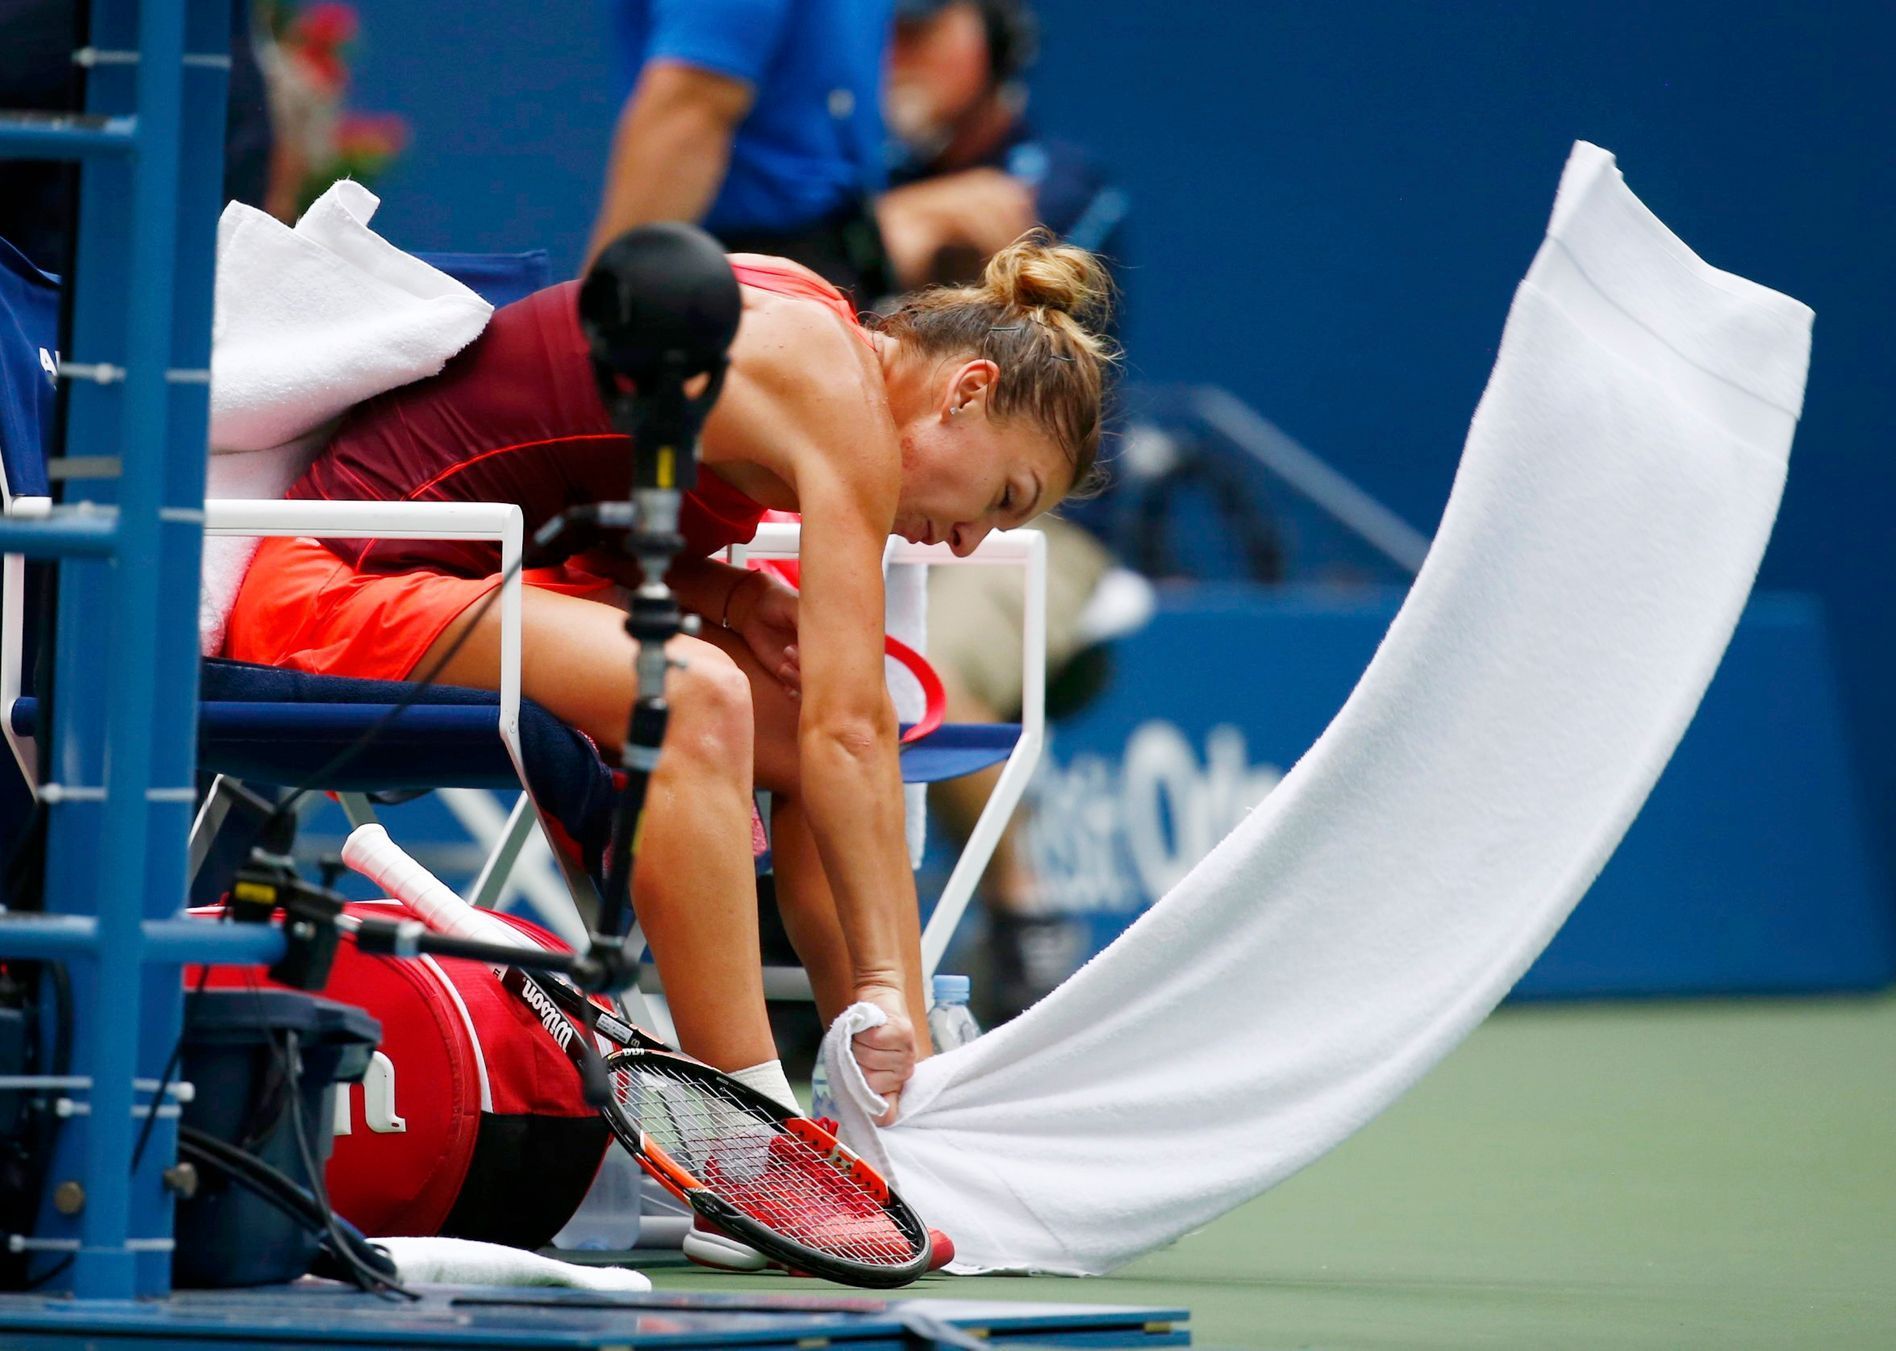 Halep of Romania reacts during a break in play after losing a game to Pennetta of Italy in their women's singles semi-final match at the U.S. Open Championships Tennis tournament in New York